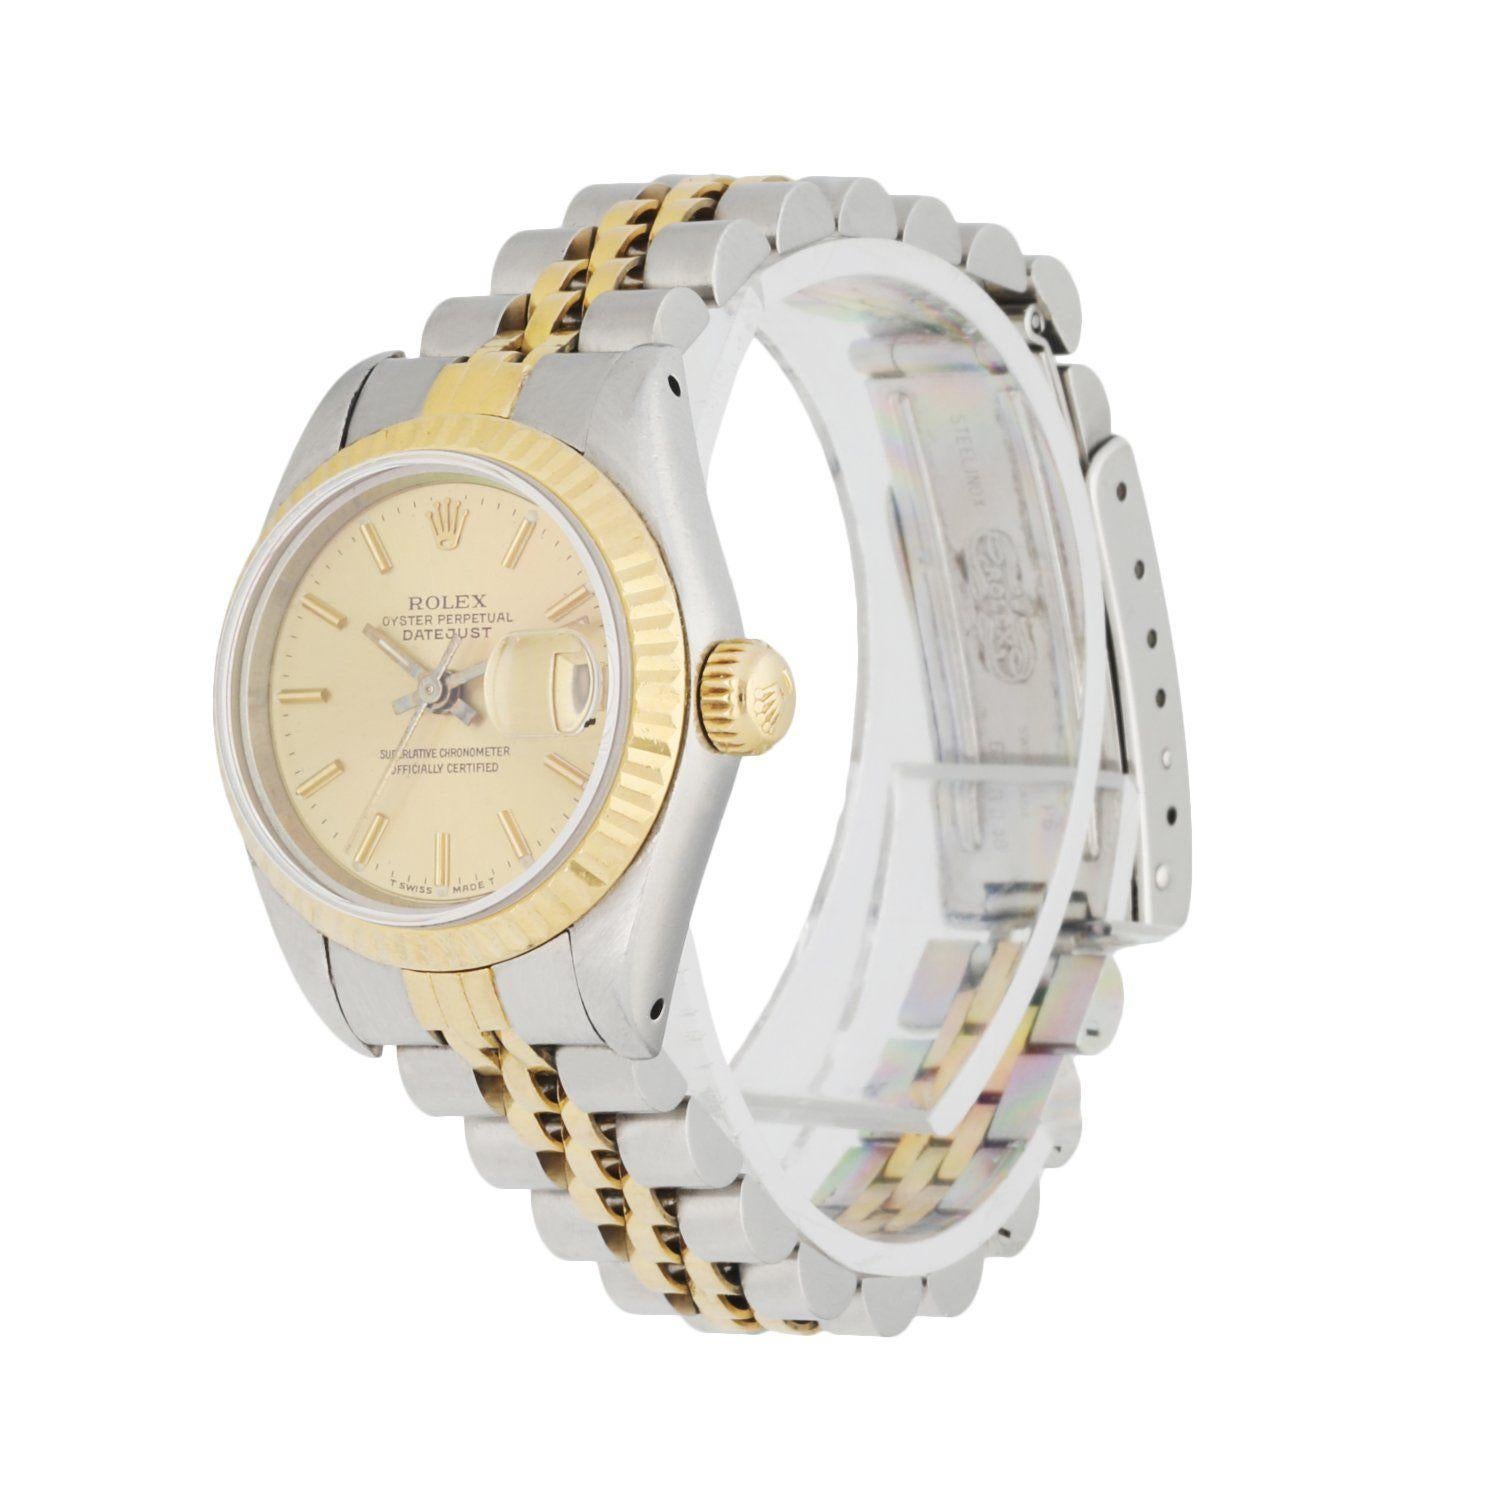 Rolex Datejust 69173 Ladies Watch. 26mm Stainless Steel case. 18K Yellow GoldÂ fluted bezel. Champagne dial with Luminous gold hands and index hour markers. Minute markers on the outer dial. Date display at the 3 o'clock position. Stainless steel &